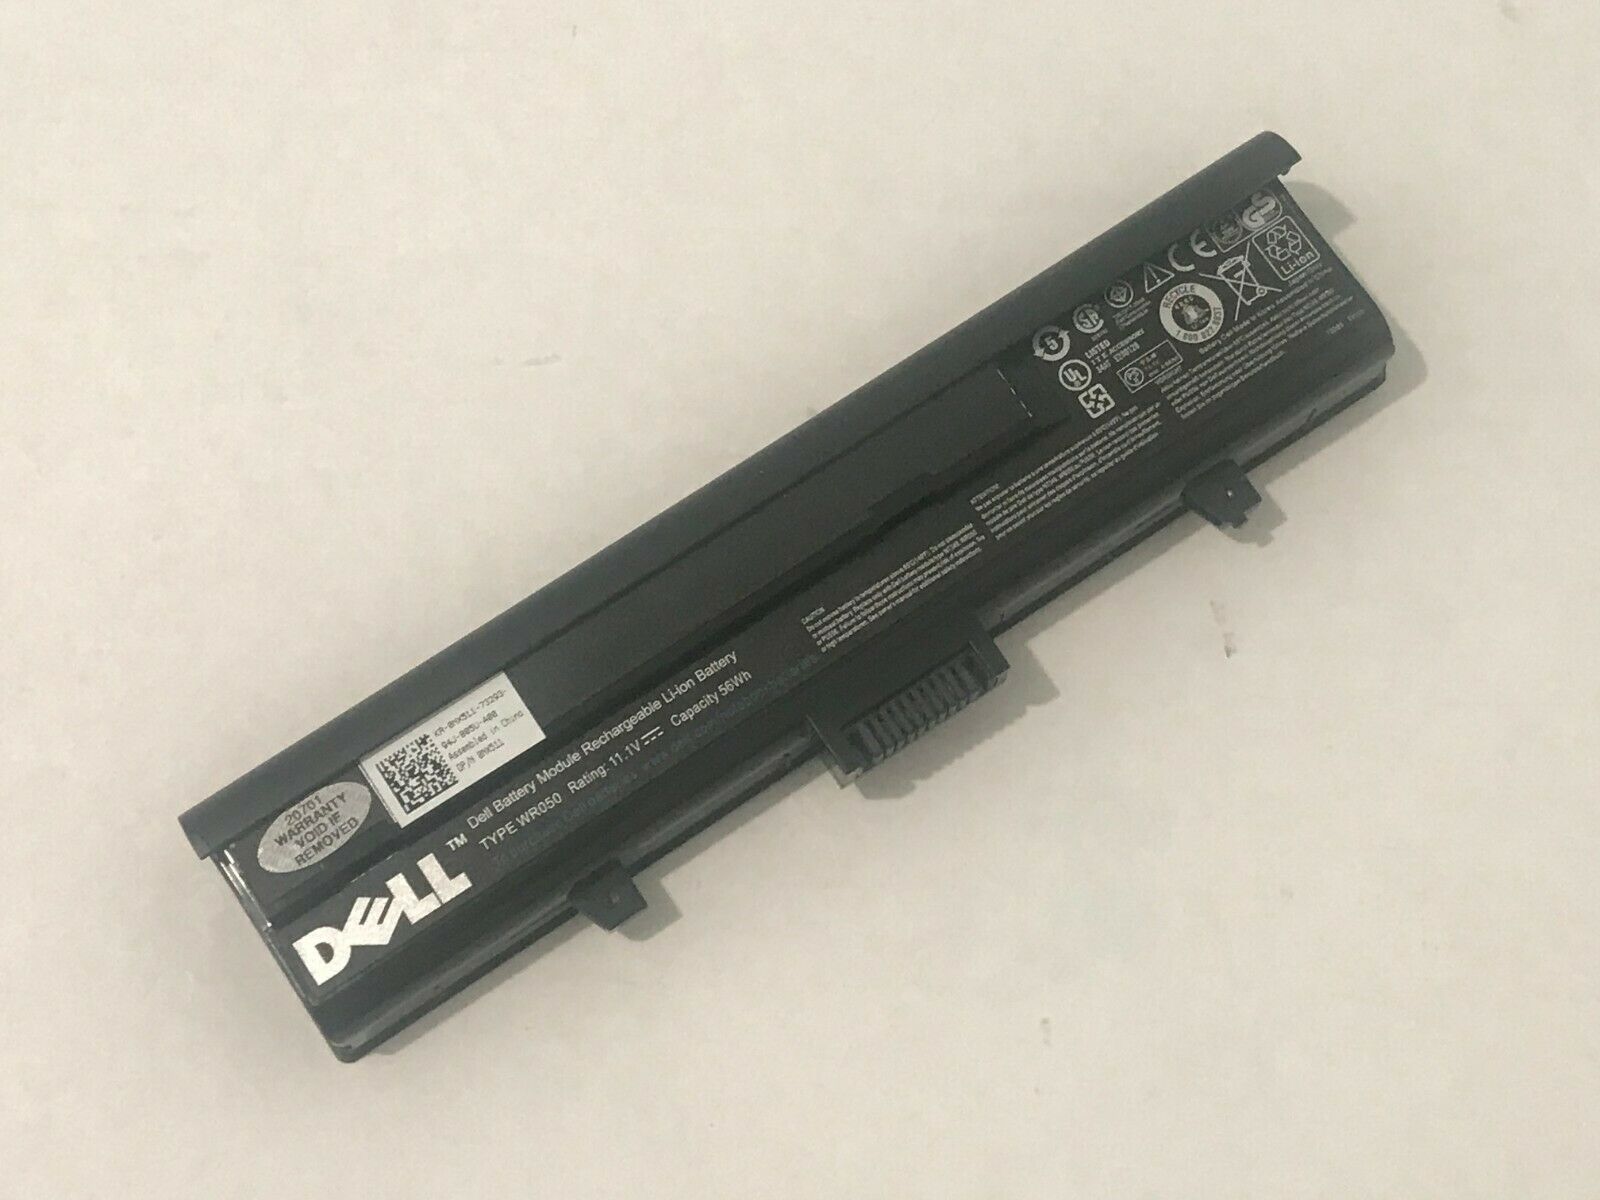 BPWR050 BATTERY PACK FOR DELL INSPIRON XPS M1330 M COMPATIBLE  11.1 V 5100MAH